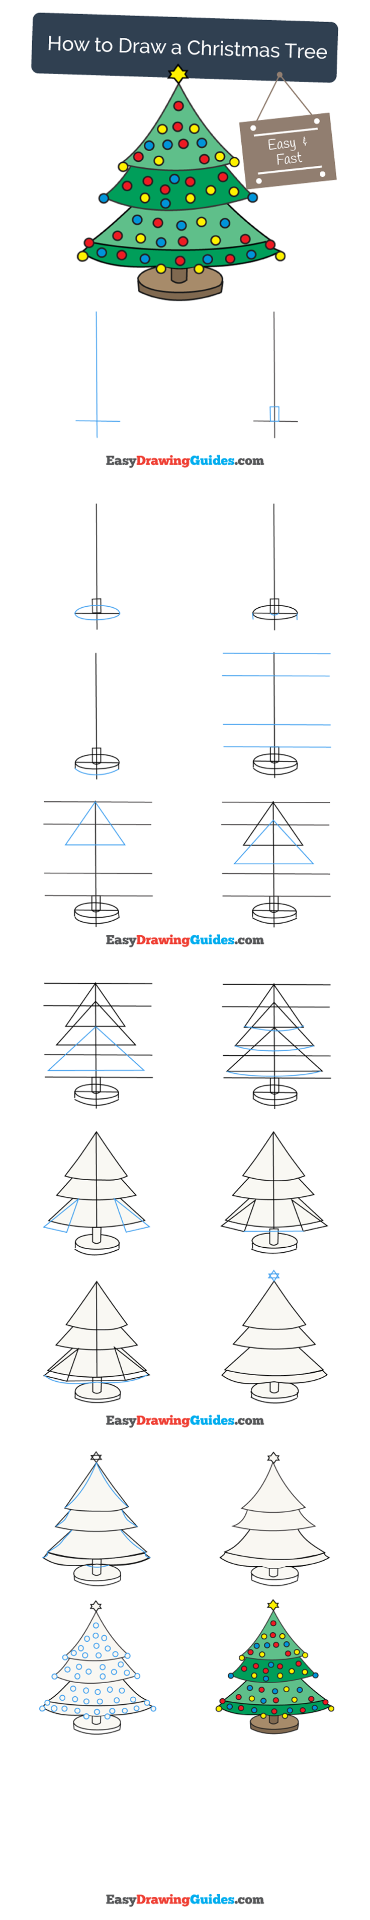 How To Draw A Christmas Tree Easy Step By